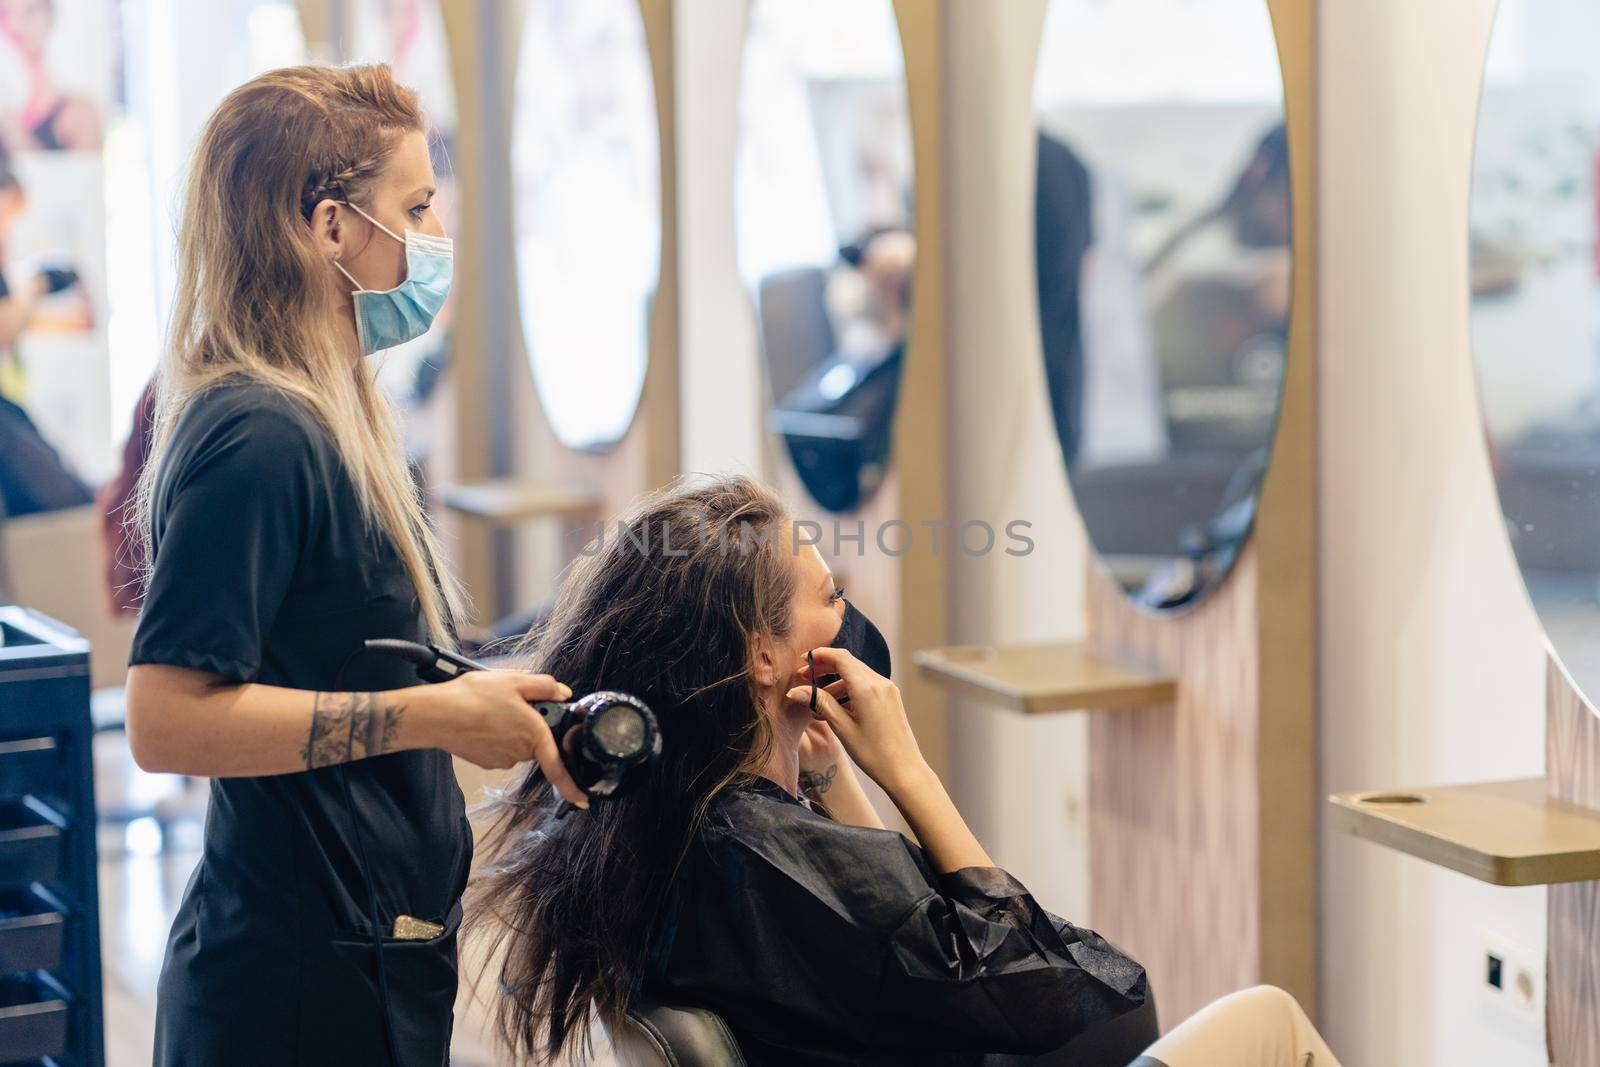 Female hairdresser drying her client's hair with a hairdryer, wearing protective masks in a beauty centre. Business and beauty concepts